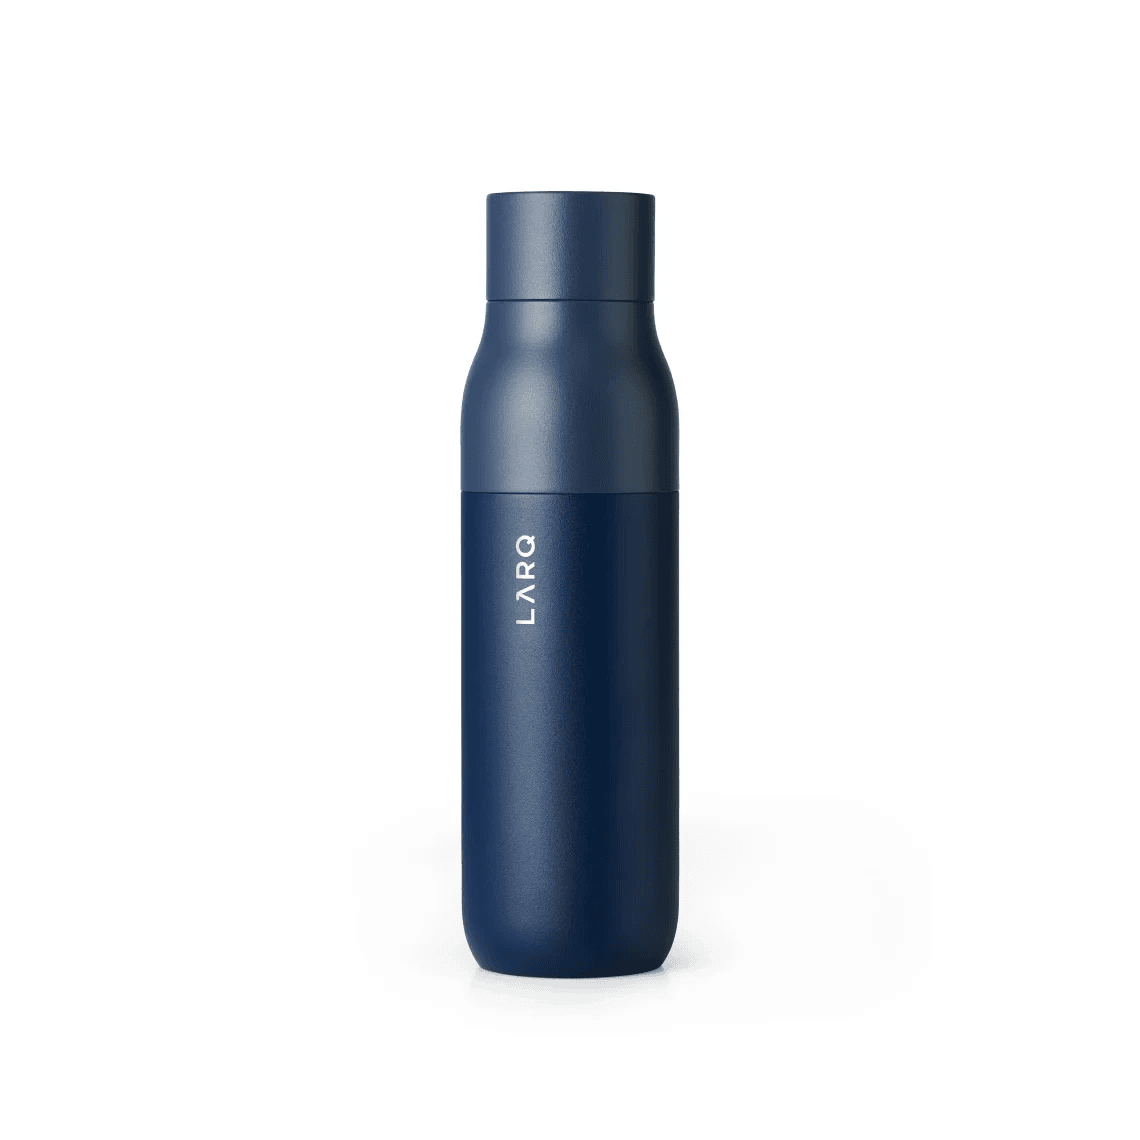 LARQ Bottle PureVis 500ml - The Luxury Promotional Gifts Company Limited